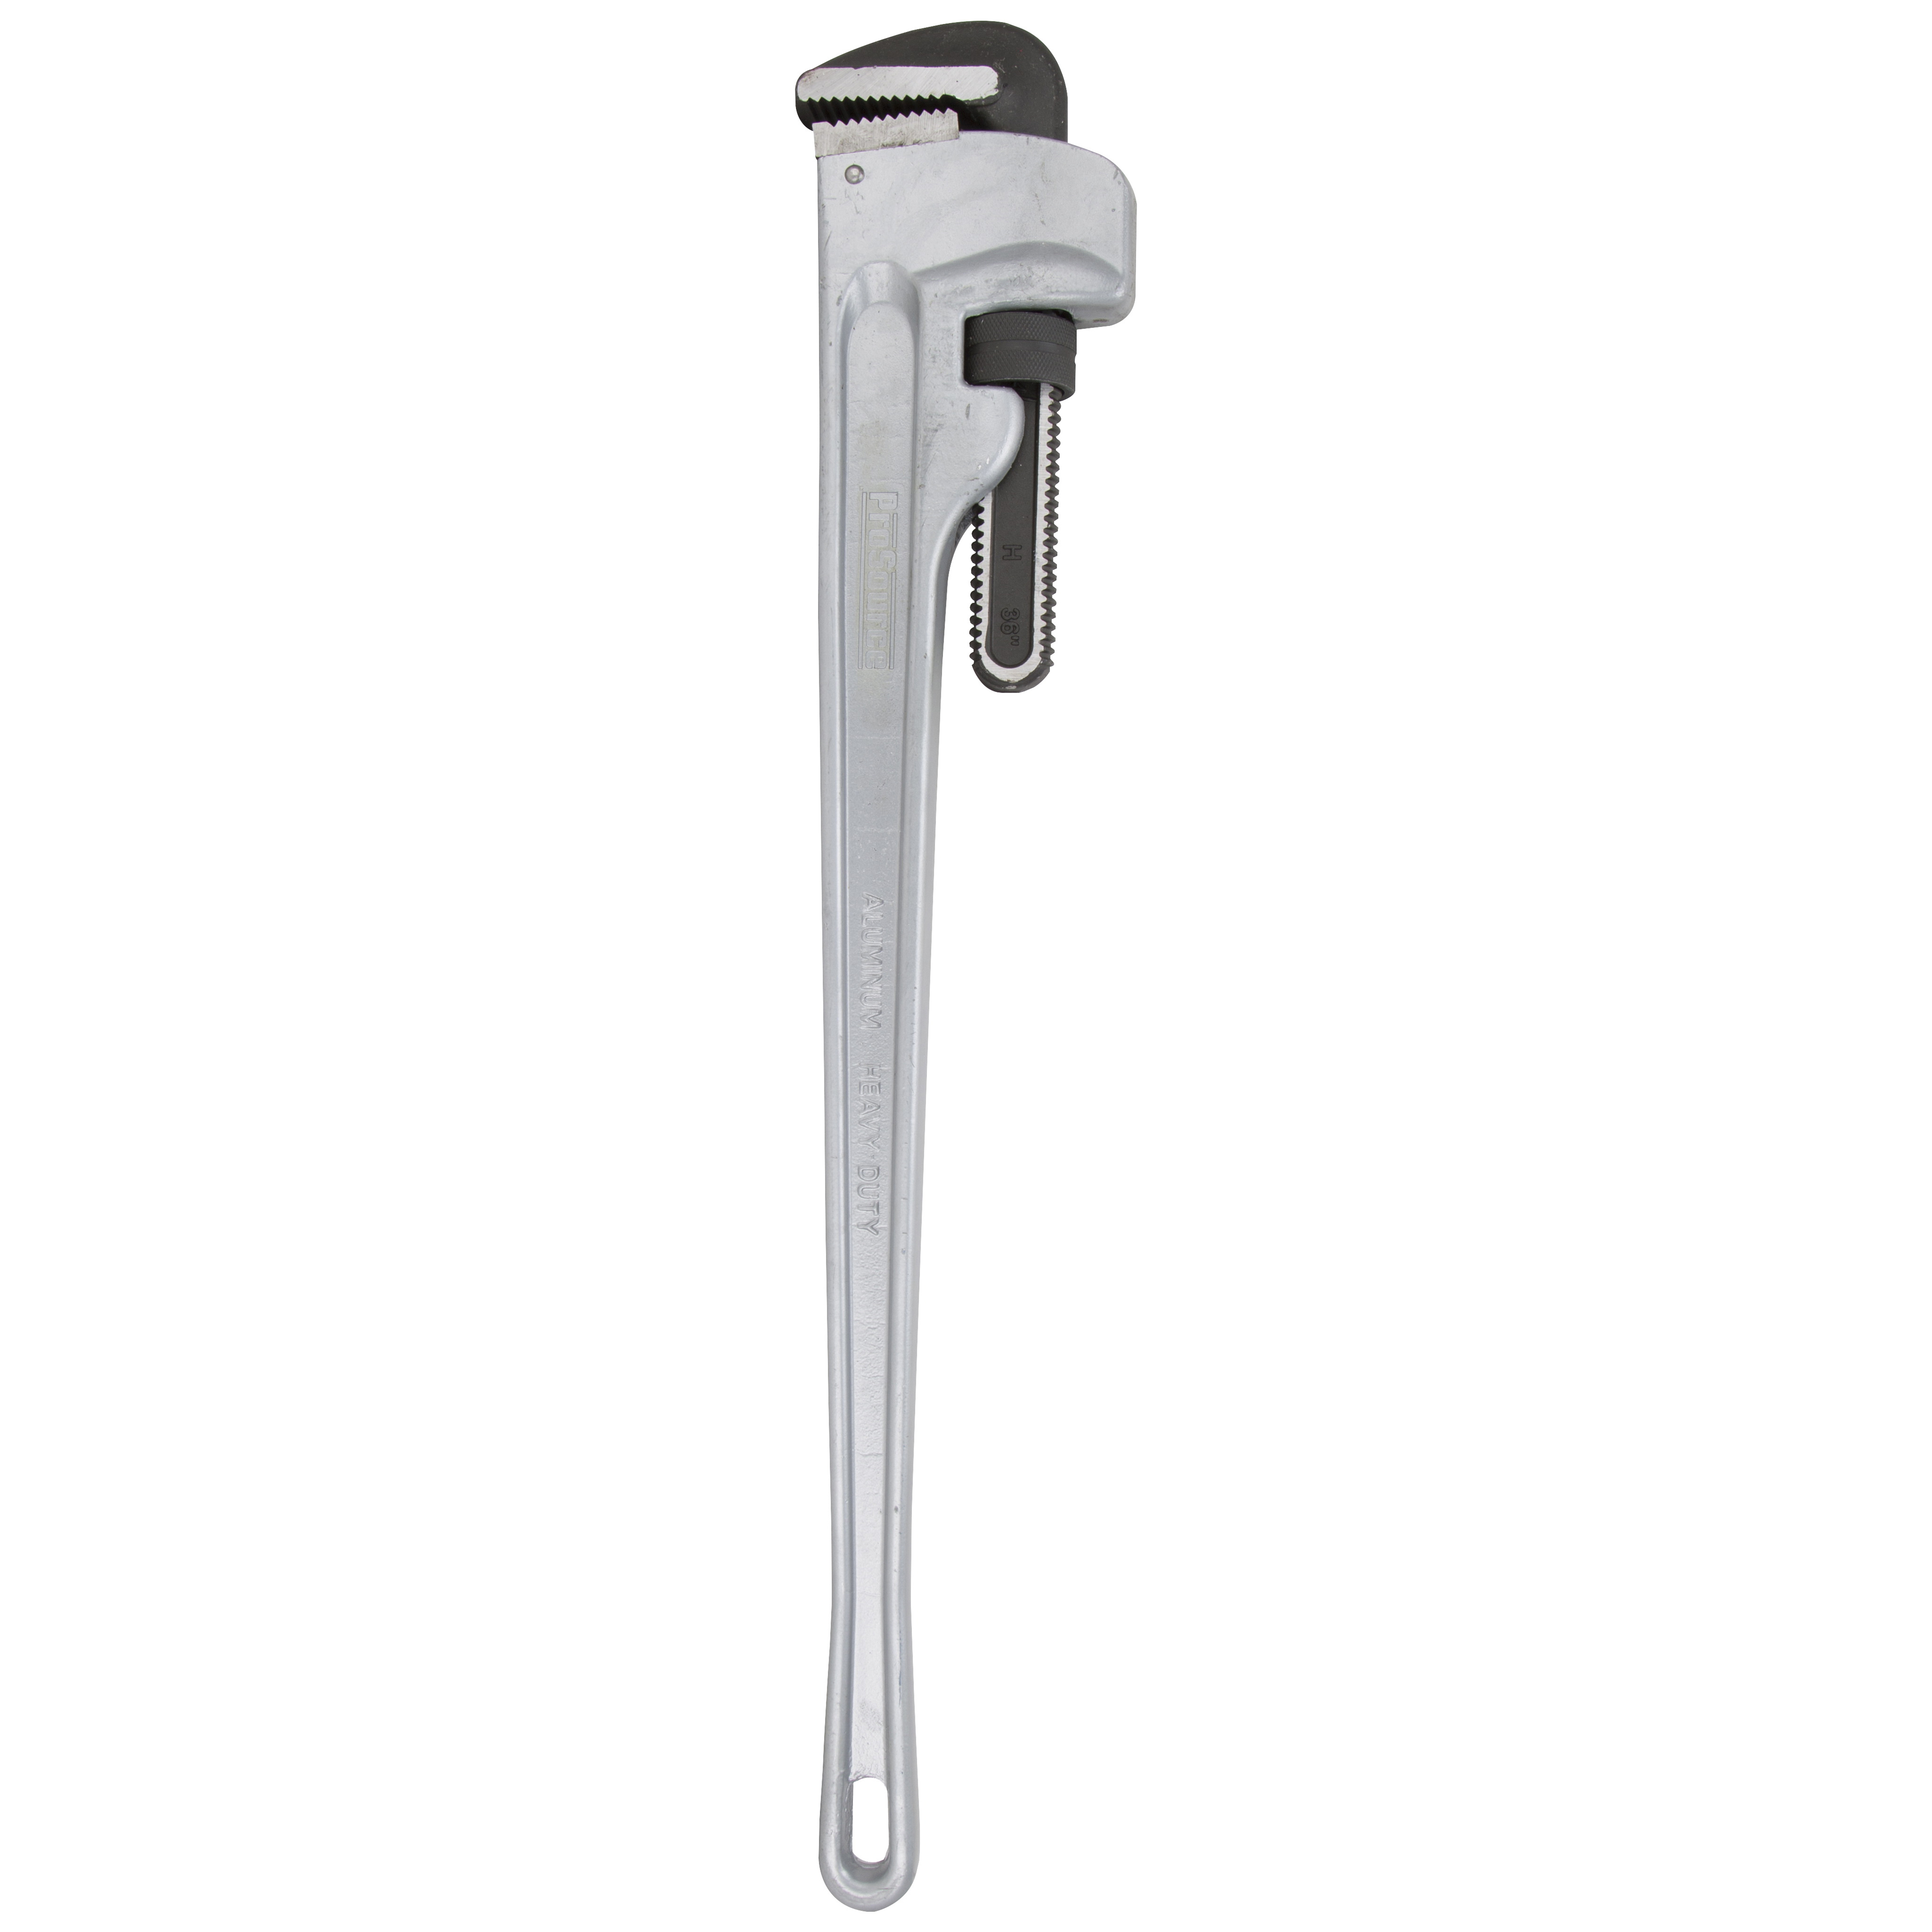 JL40036 Pipe Wrench, 130 mm Jaw, 36 in L, Serrated Jaw, Aluminum, Powder-Coated, Heavy-Duty Handle